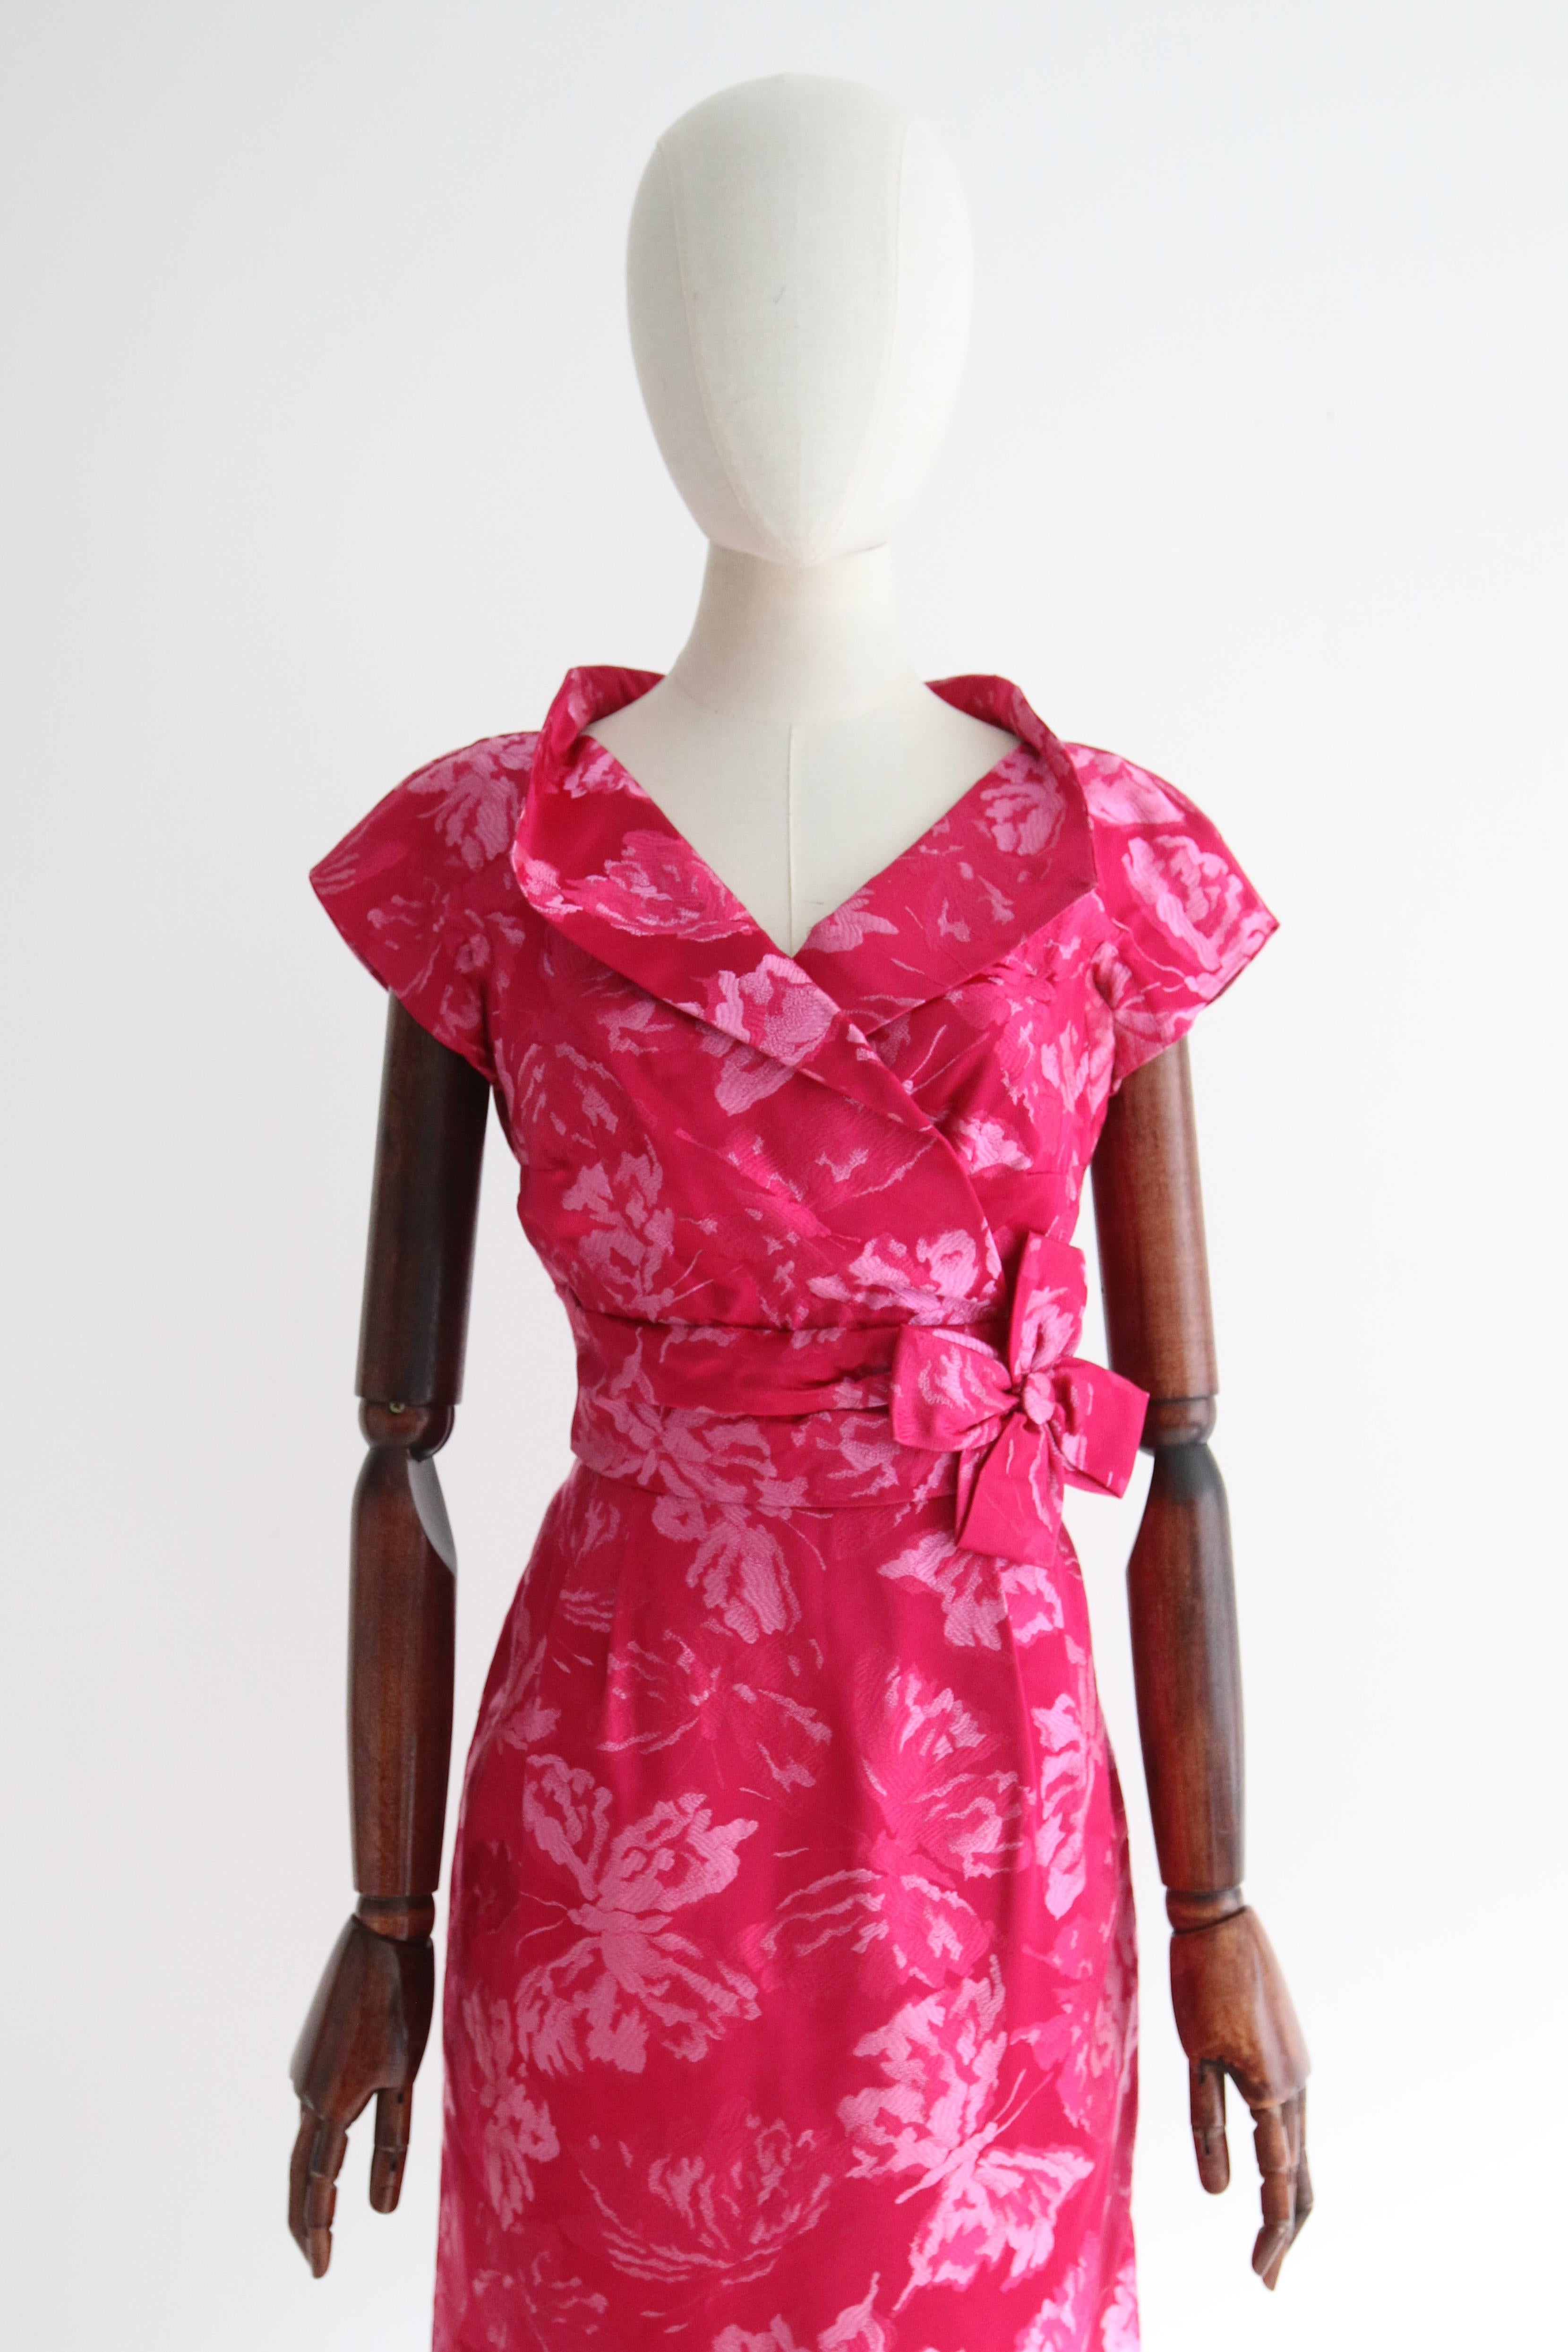 Red Vintage 1950's Silk Brocade Butterfly Dress UK 8-10 US 4-6 For Sale